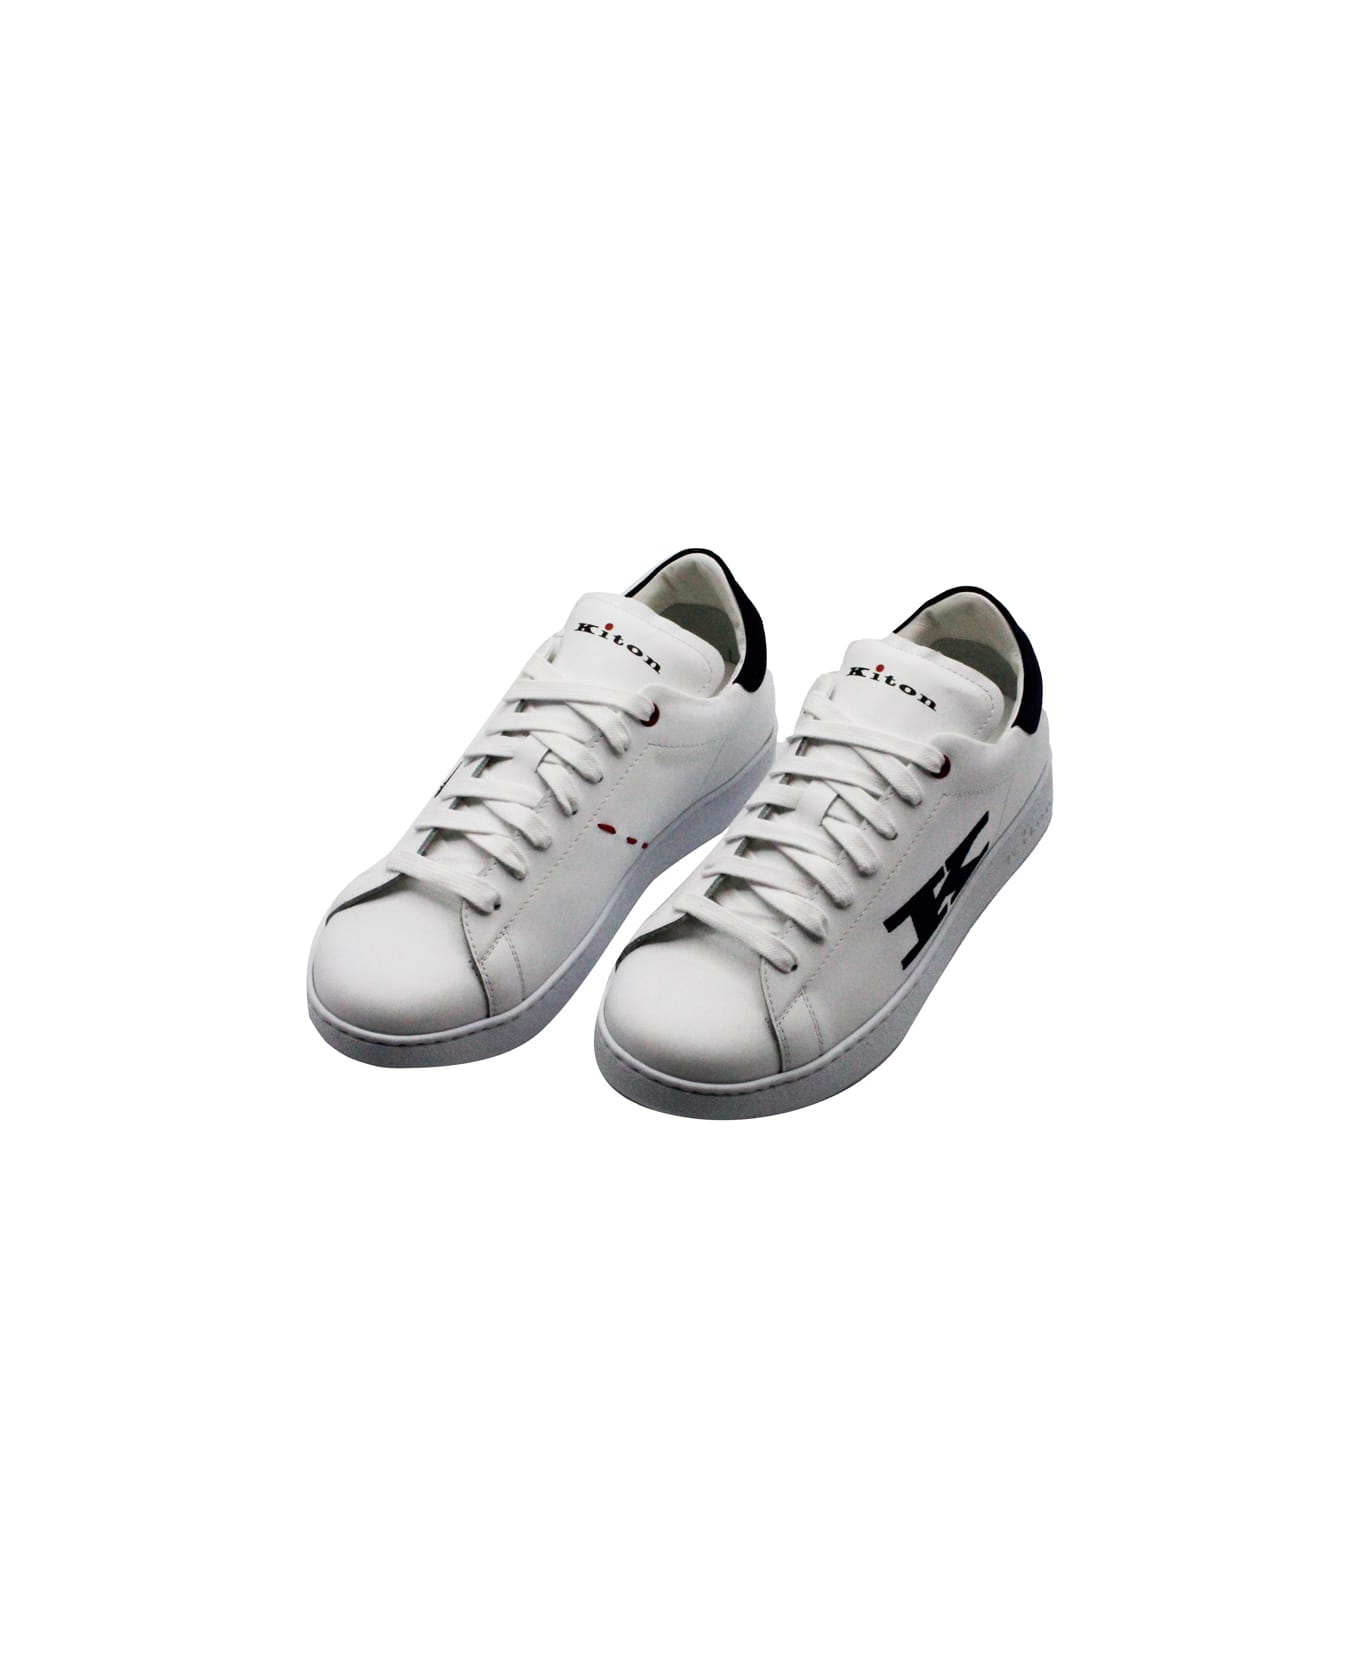 Kiton Sneackers Shoe In Leather With Suede Trims And With Contrasting Stitching. - White